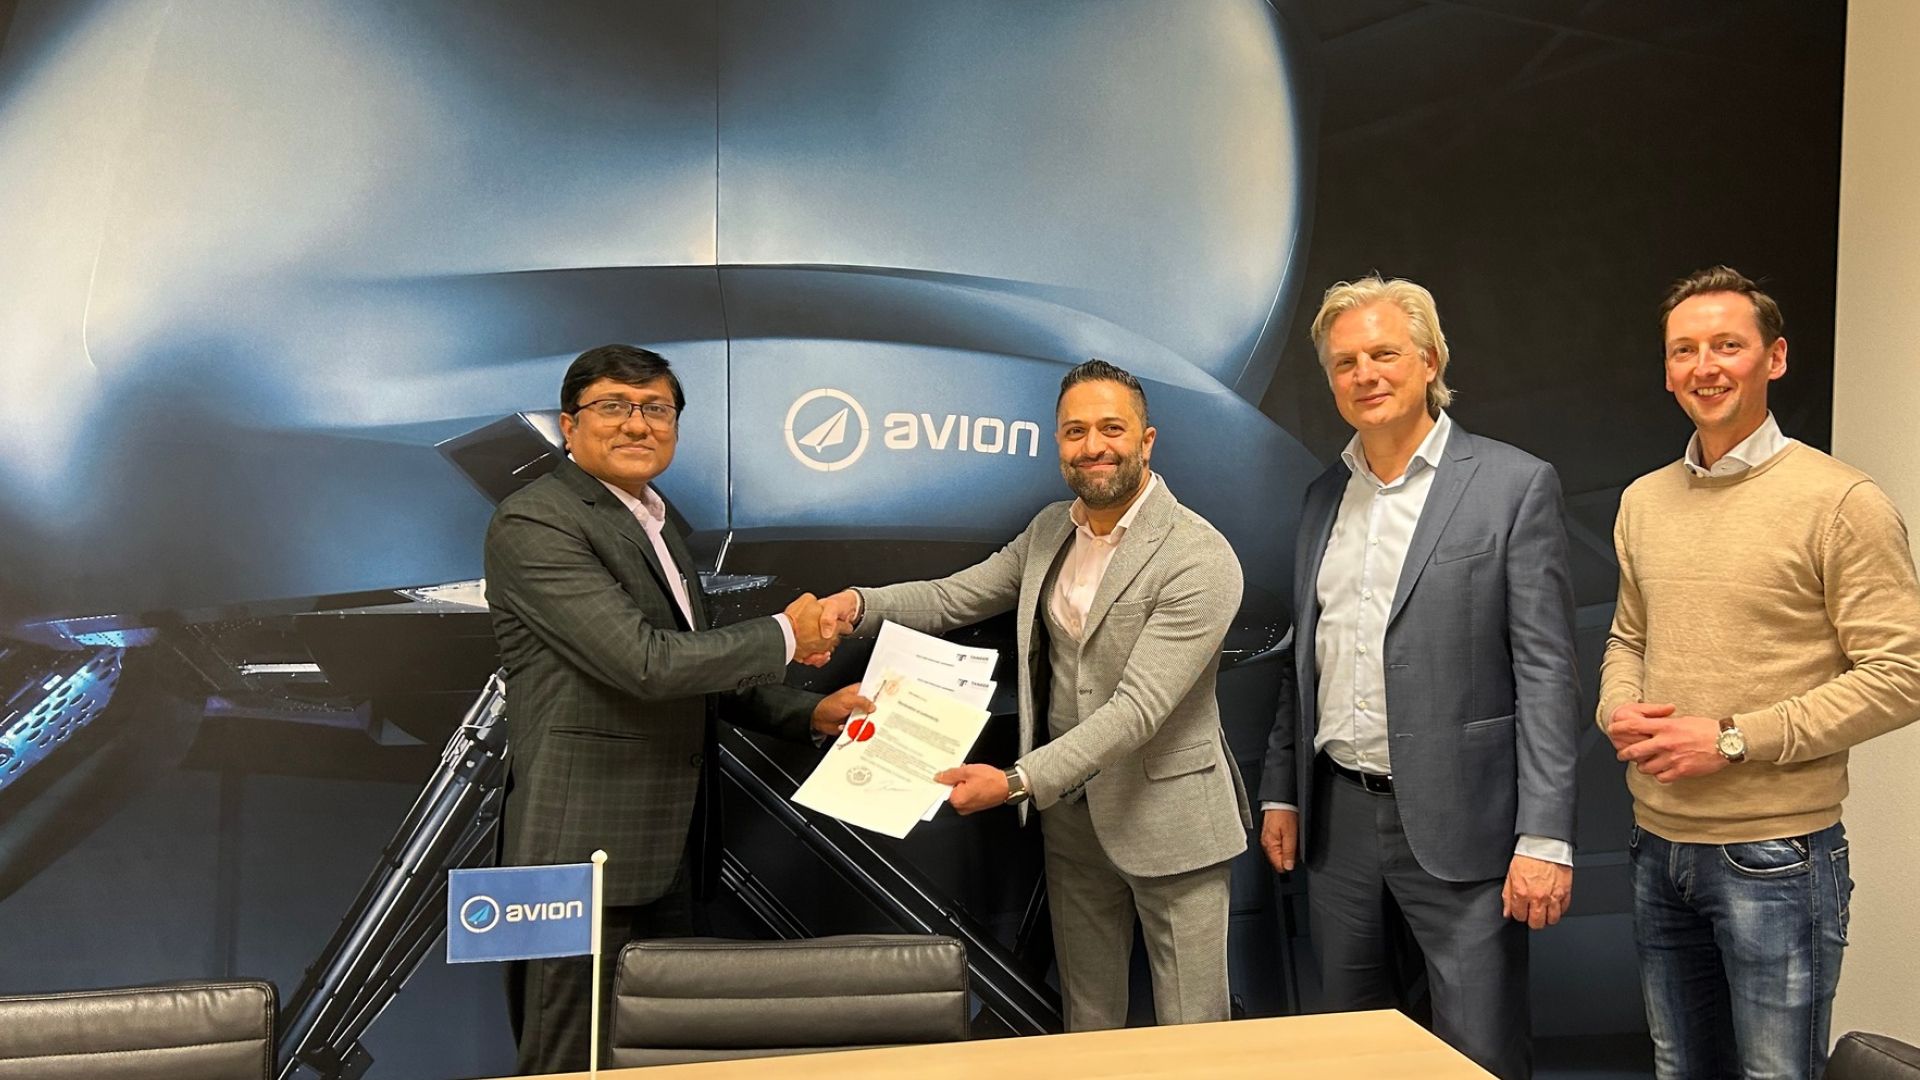 230208 Gen24 Group signs for acquisition of Avion Group and Avion Simulators